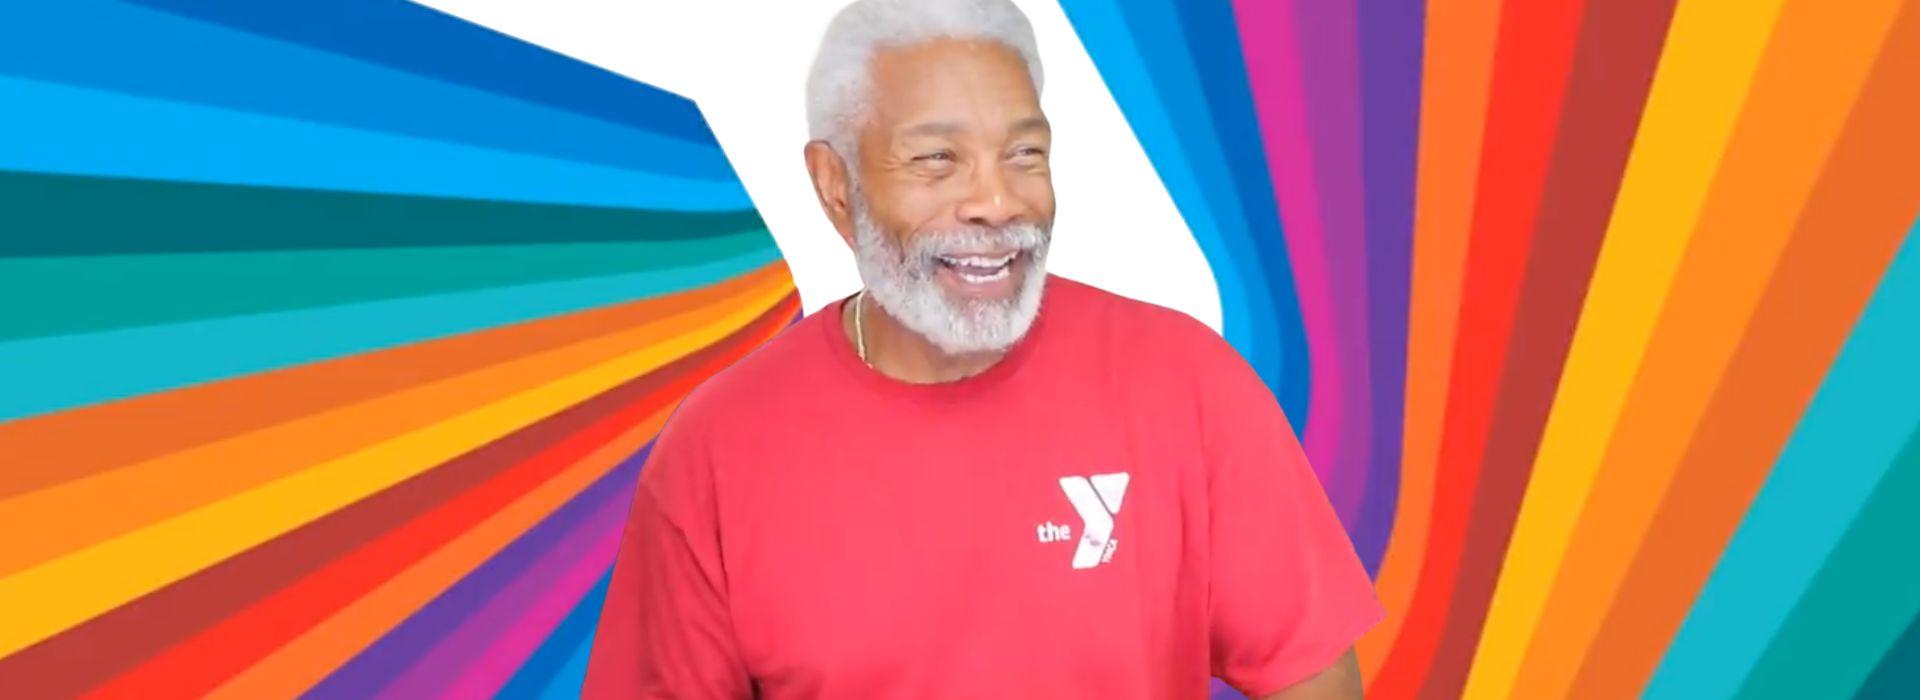 Colorful dynamic background with older gentleman in red shirt with Y logo, looking slightly off to the right and smiling